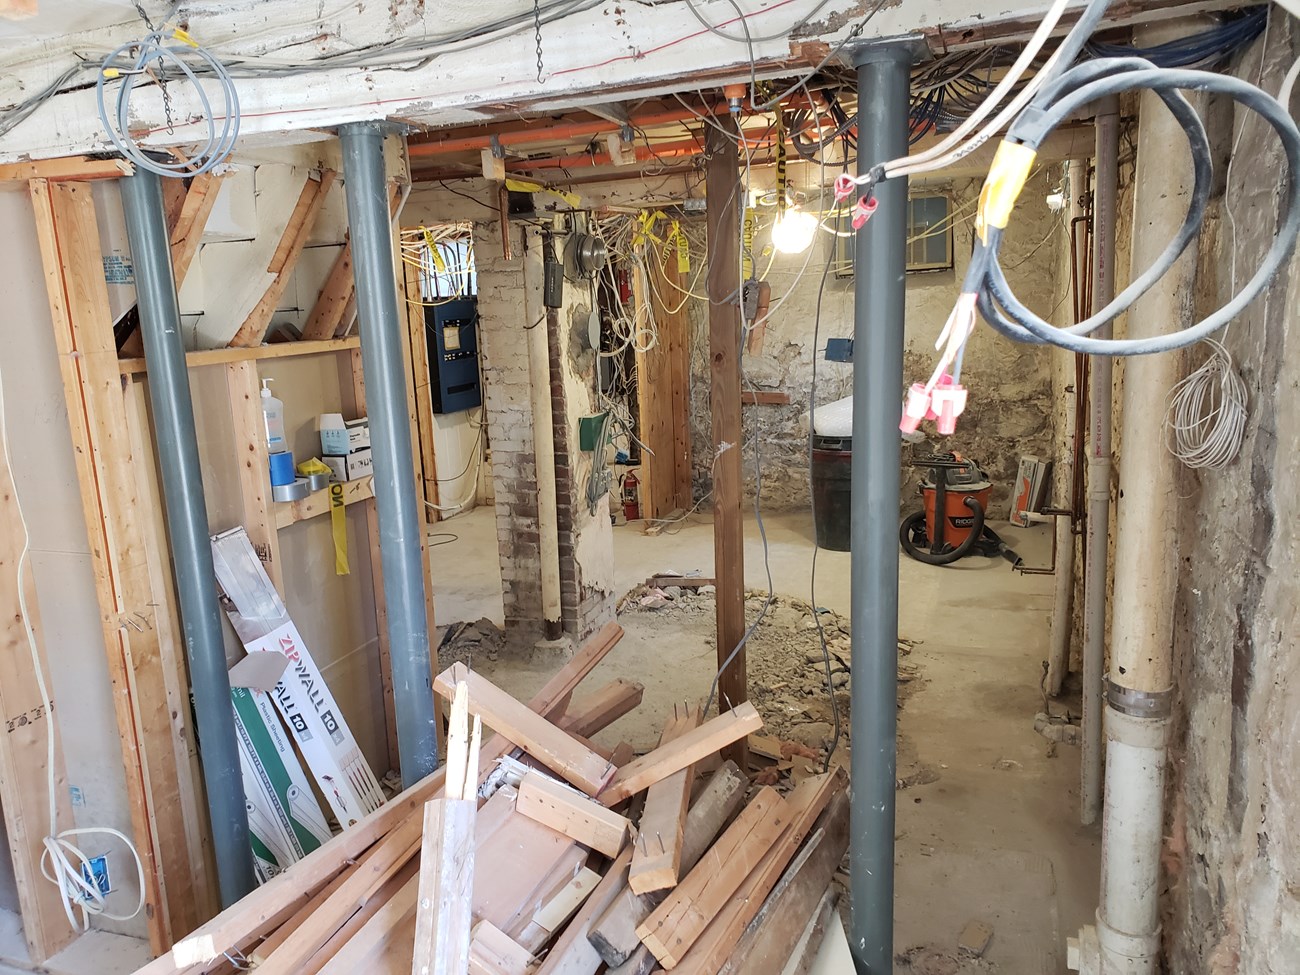 A view of the basement visitor center under renovations.  Building materials and cables are visible.